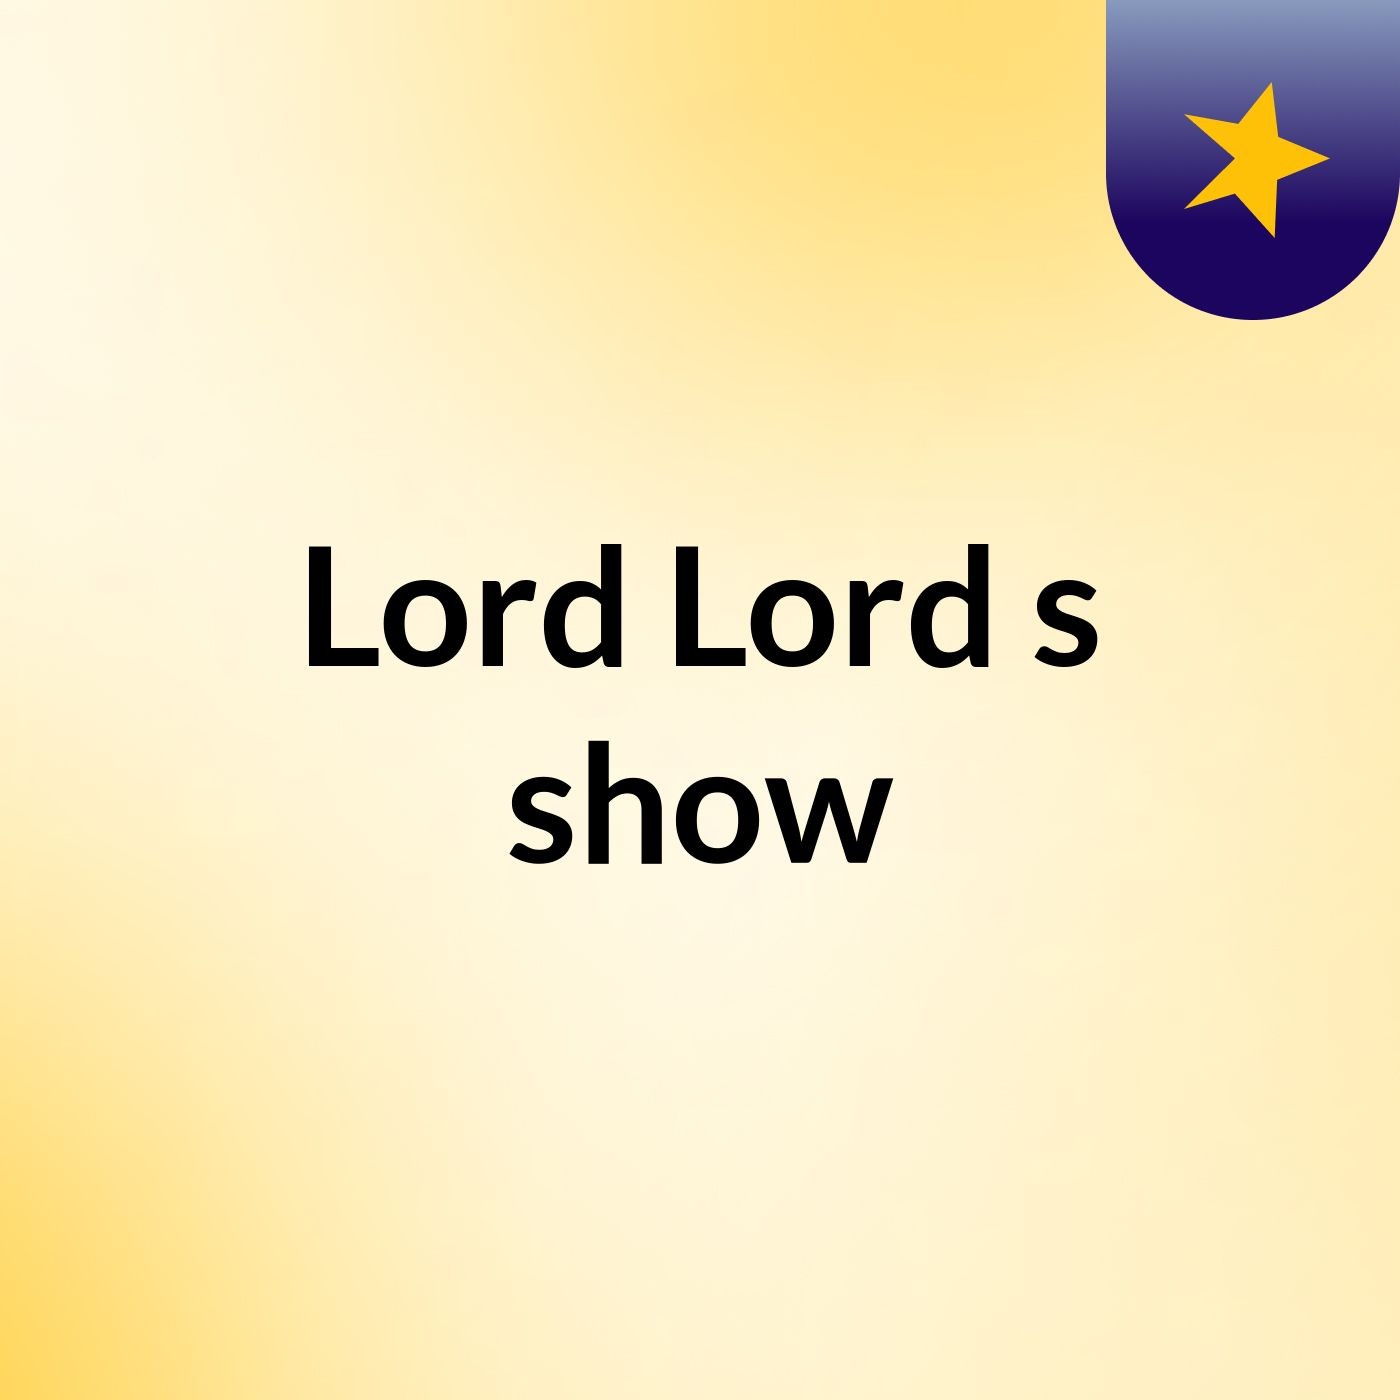 Lord Lord's show